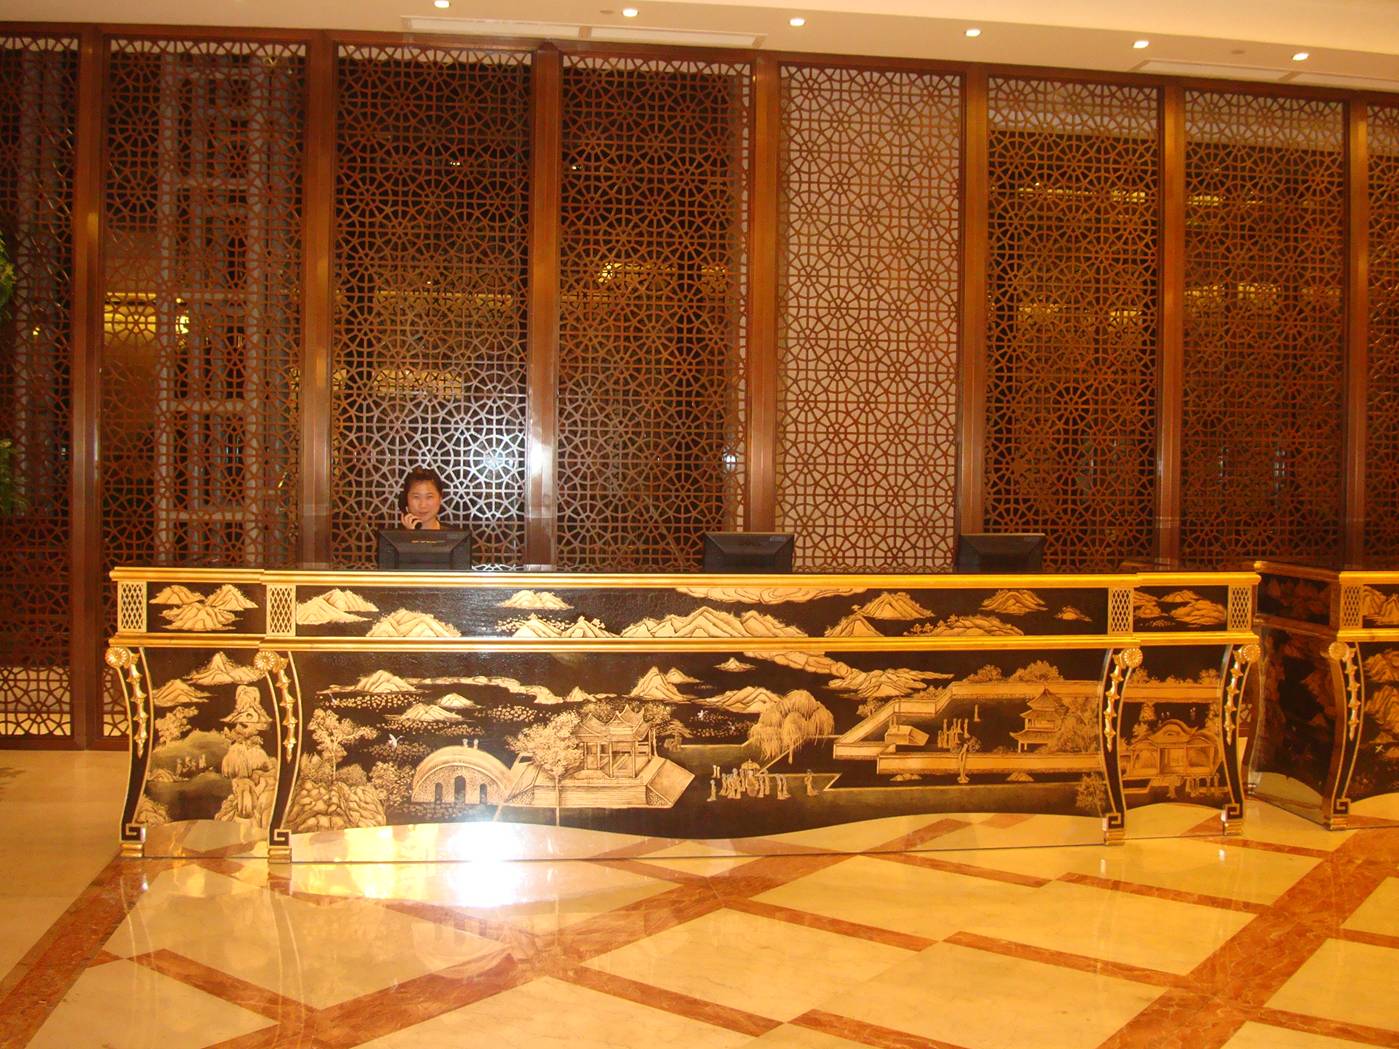 picture:  Now that's a reception desk.  The new five star hotel in downtown Wuxi, China